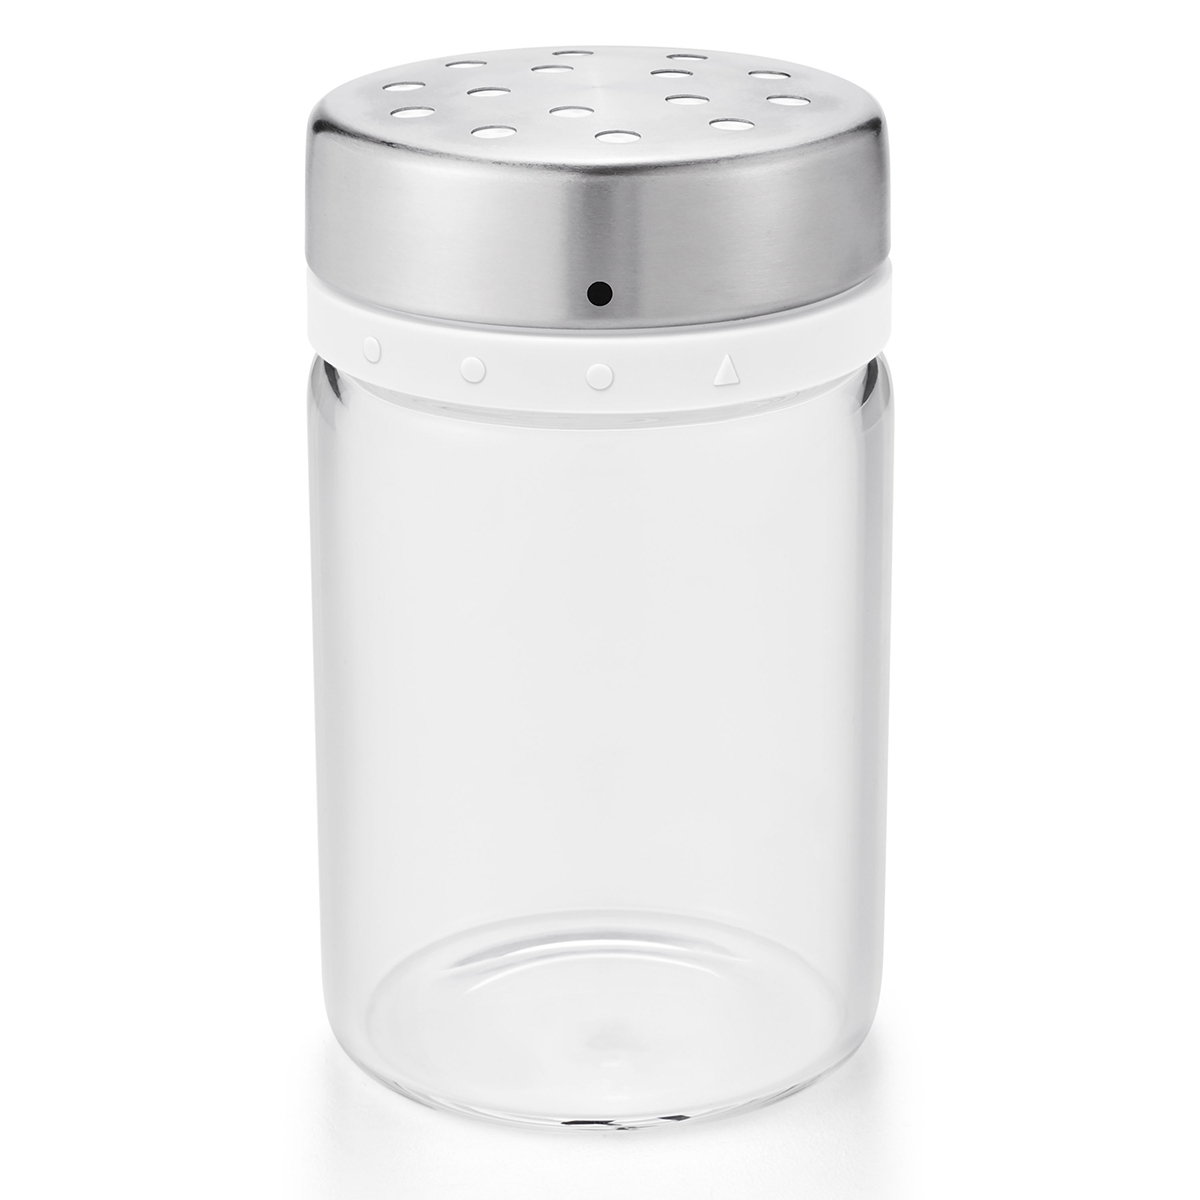 https://www.containerstore.com/catalogimages/423271/10085820-OXO-Shaker-VEN1.jpg